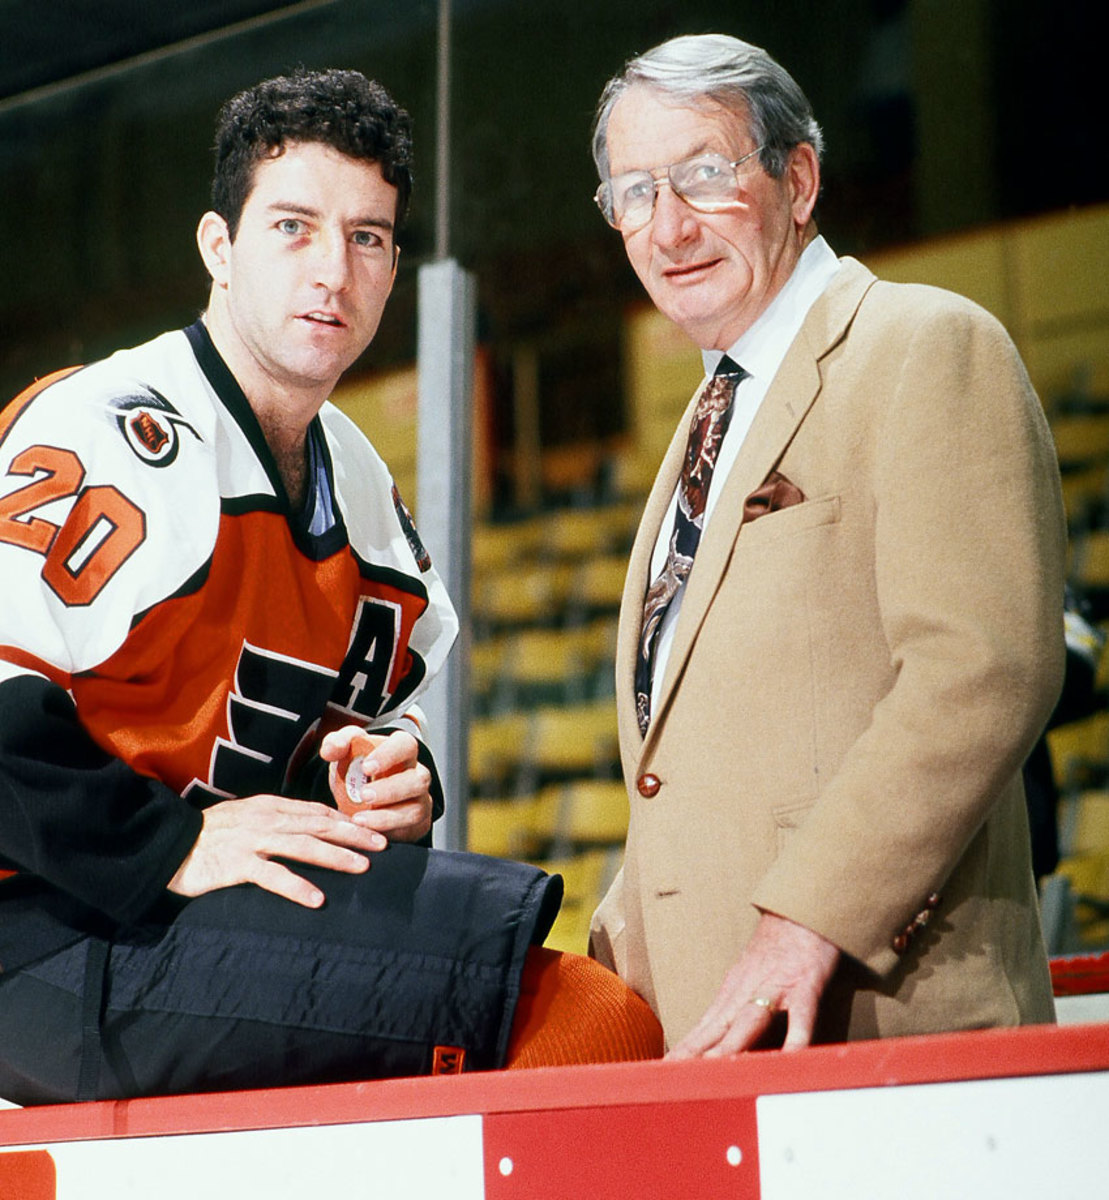 Kevin-Bill-Dineen-father-son.jpg